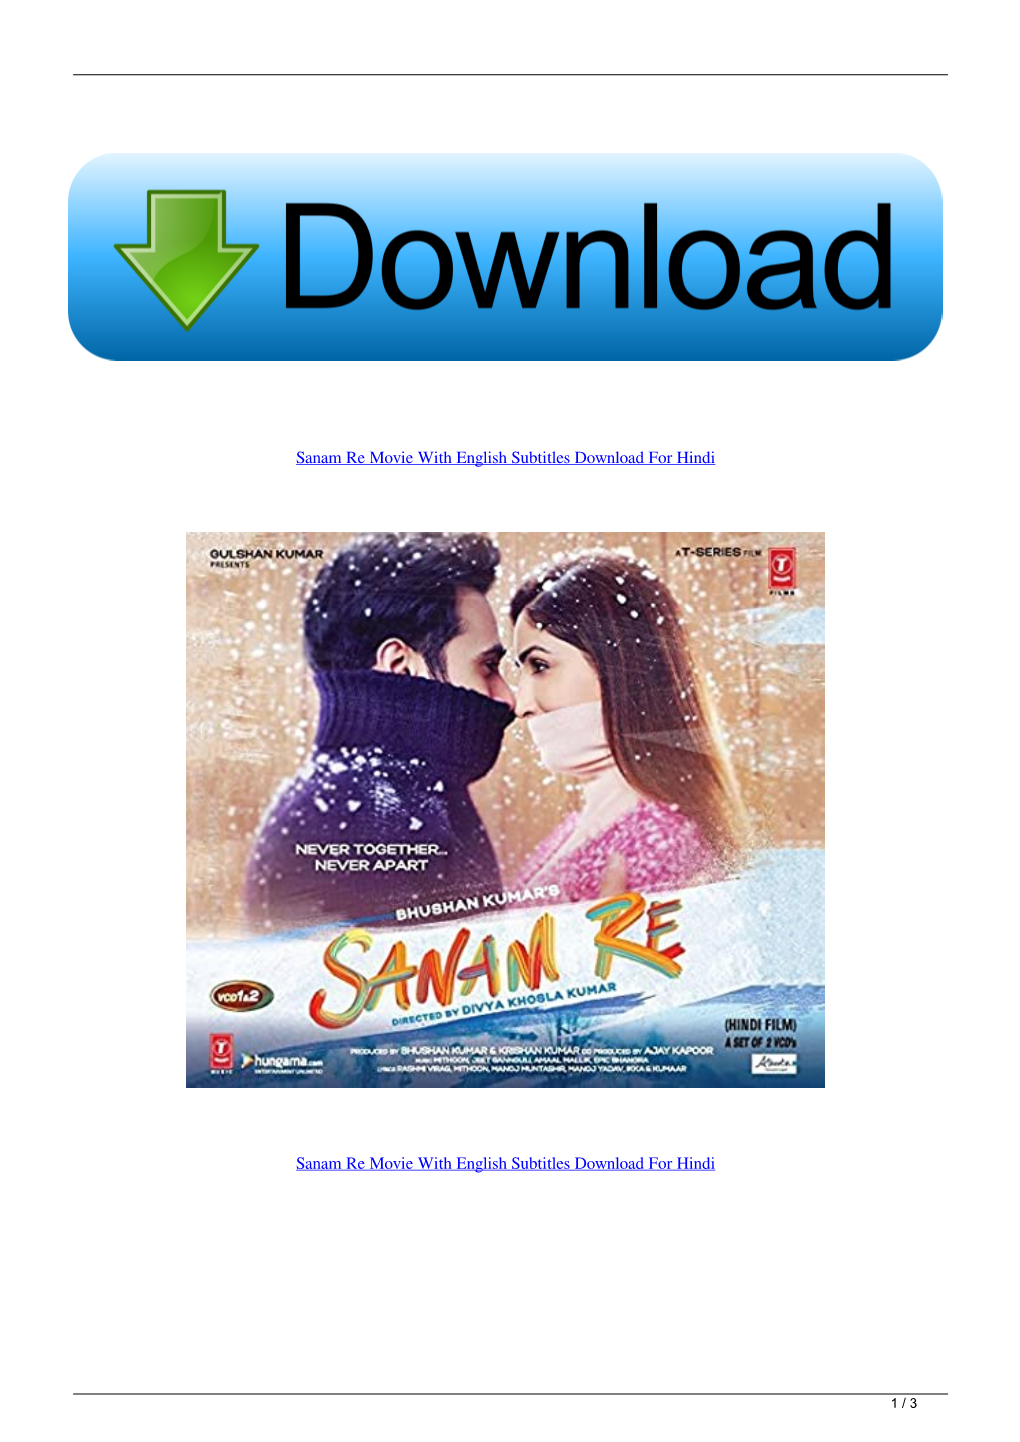 Sanam Re Movie with English Subtitles Download for Hindi